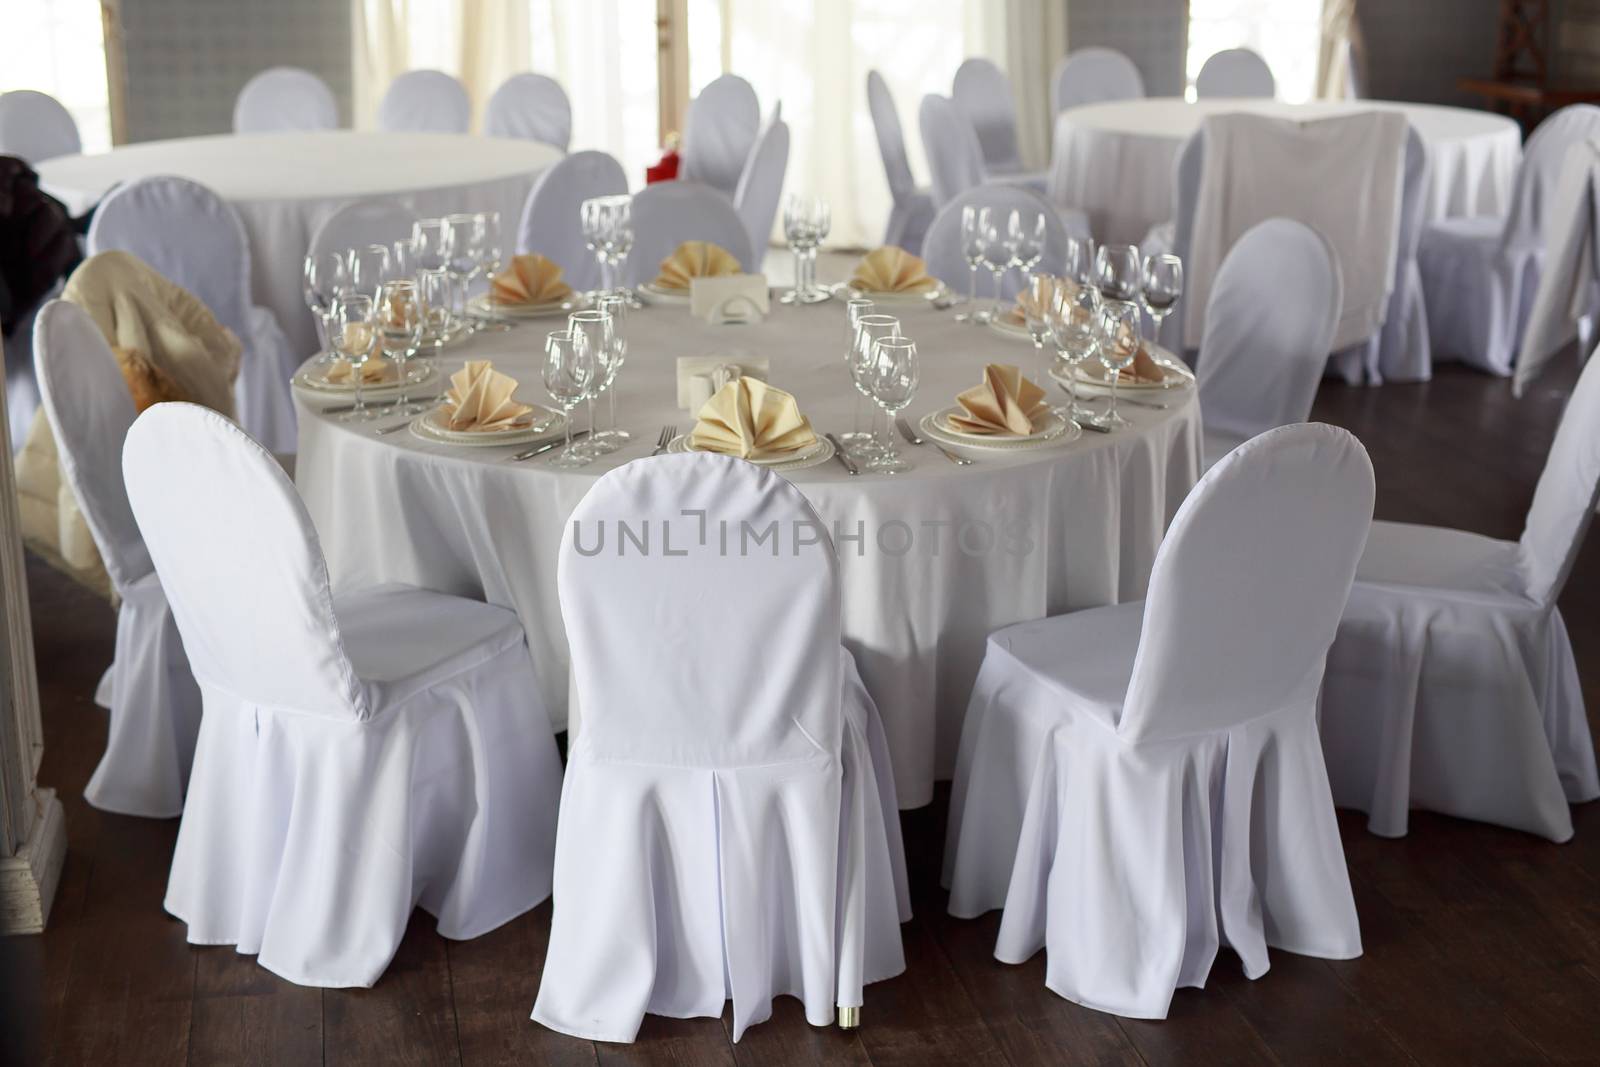 Banquet hall chairs, white tablecloth, food table, table setting, empty wine glasses, Banquet hall without people, wooden floor